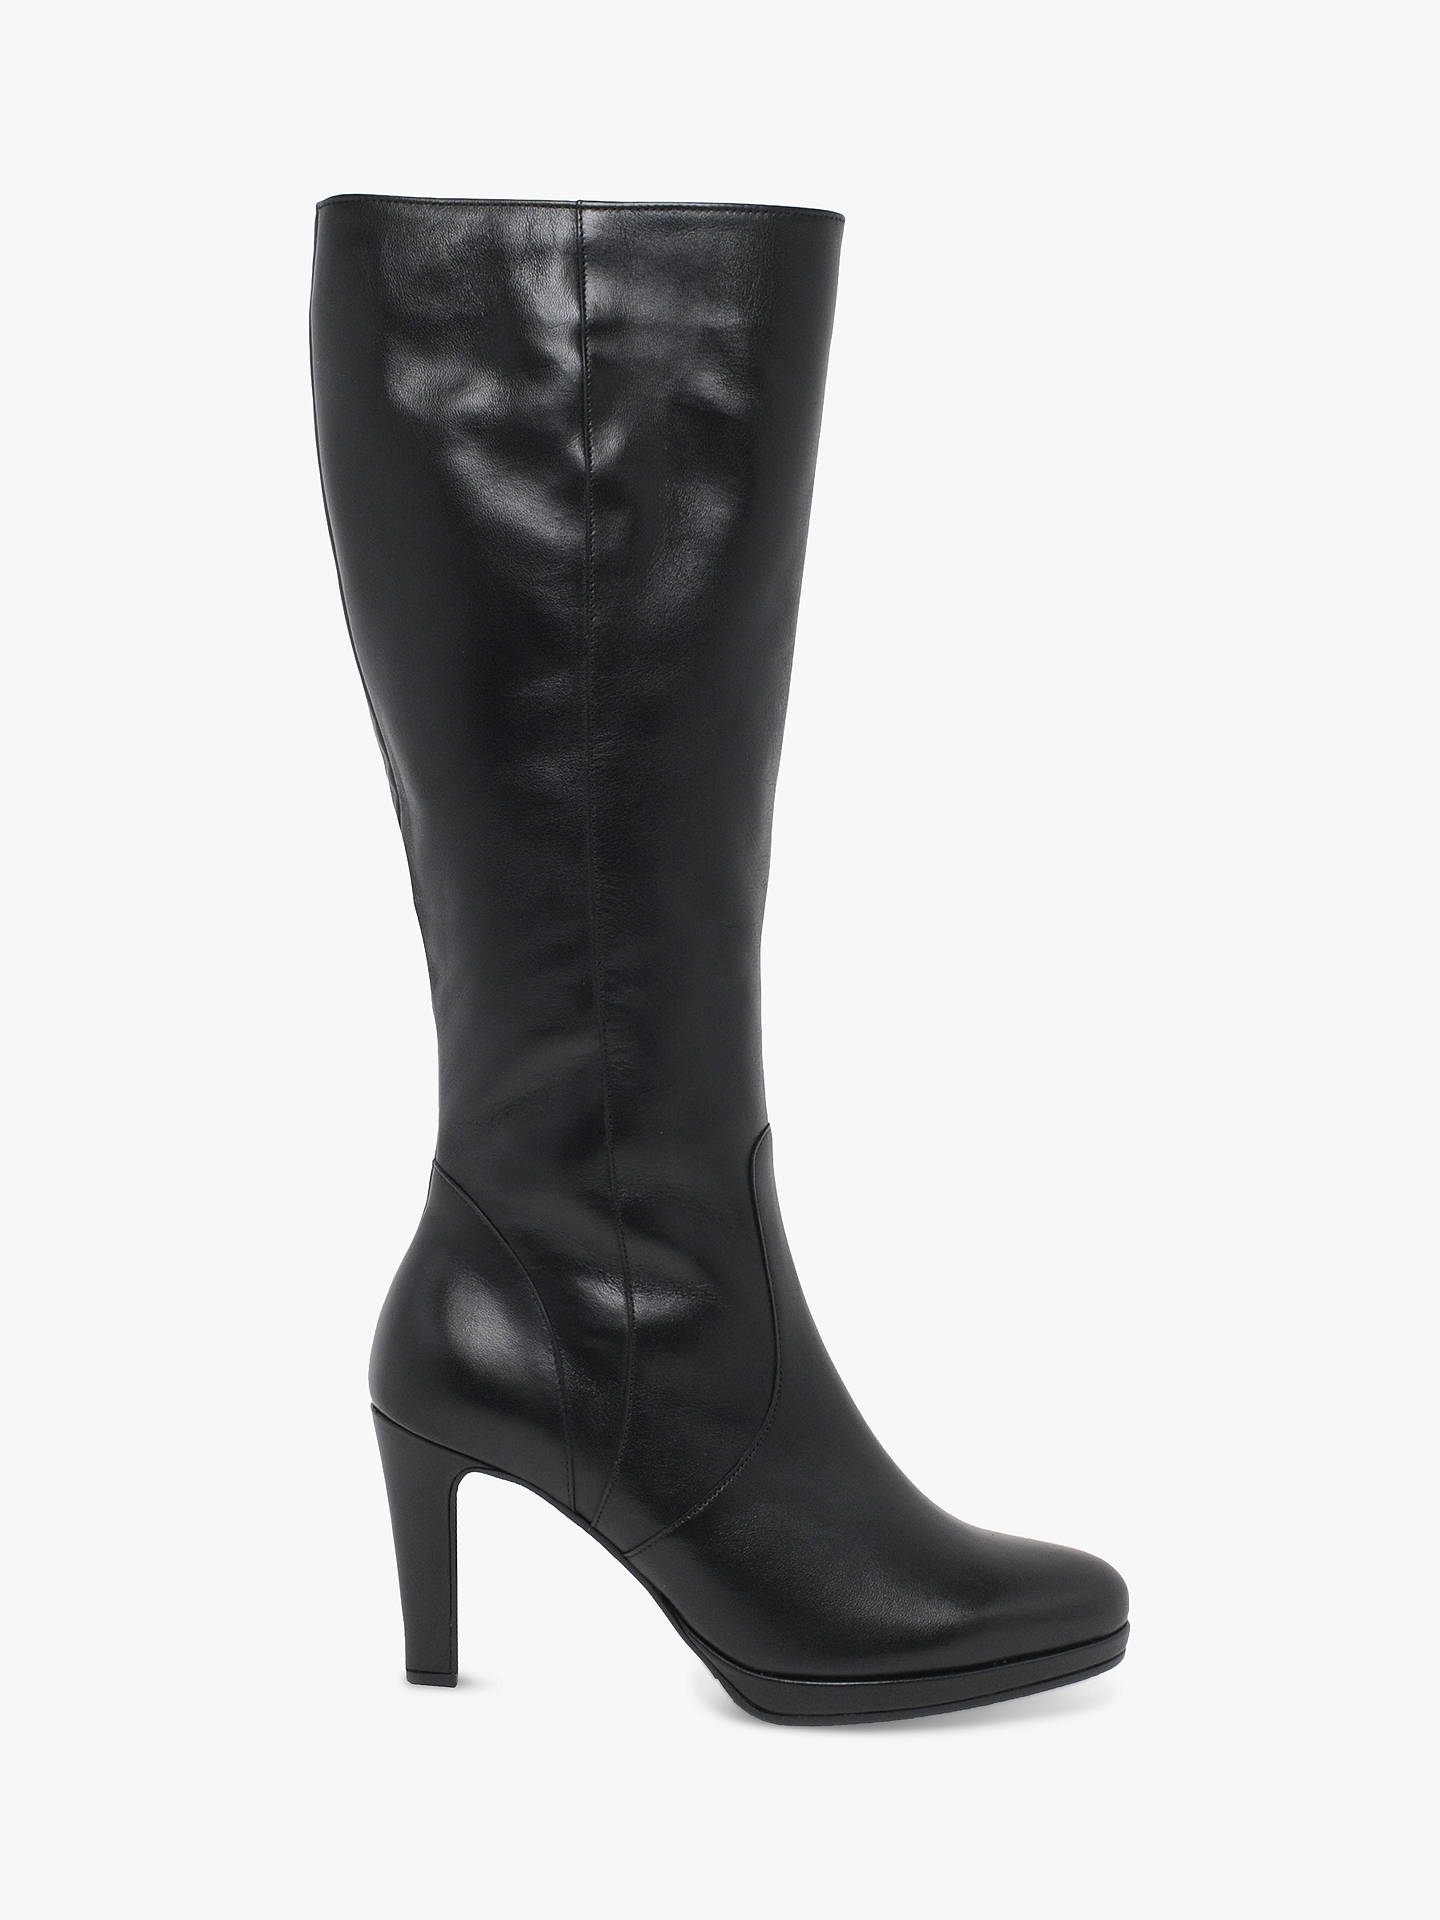 Gabor Drama Leather Knee High Boots, Black at John Lewis & Partners